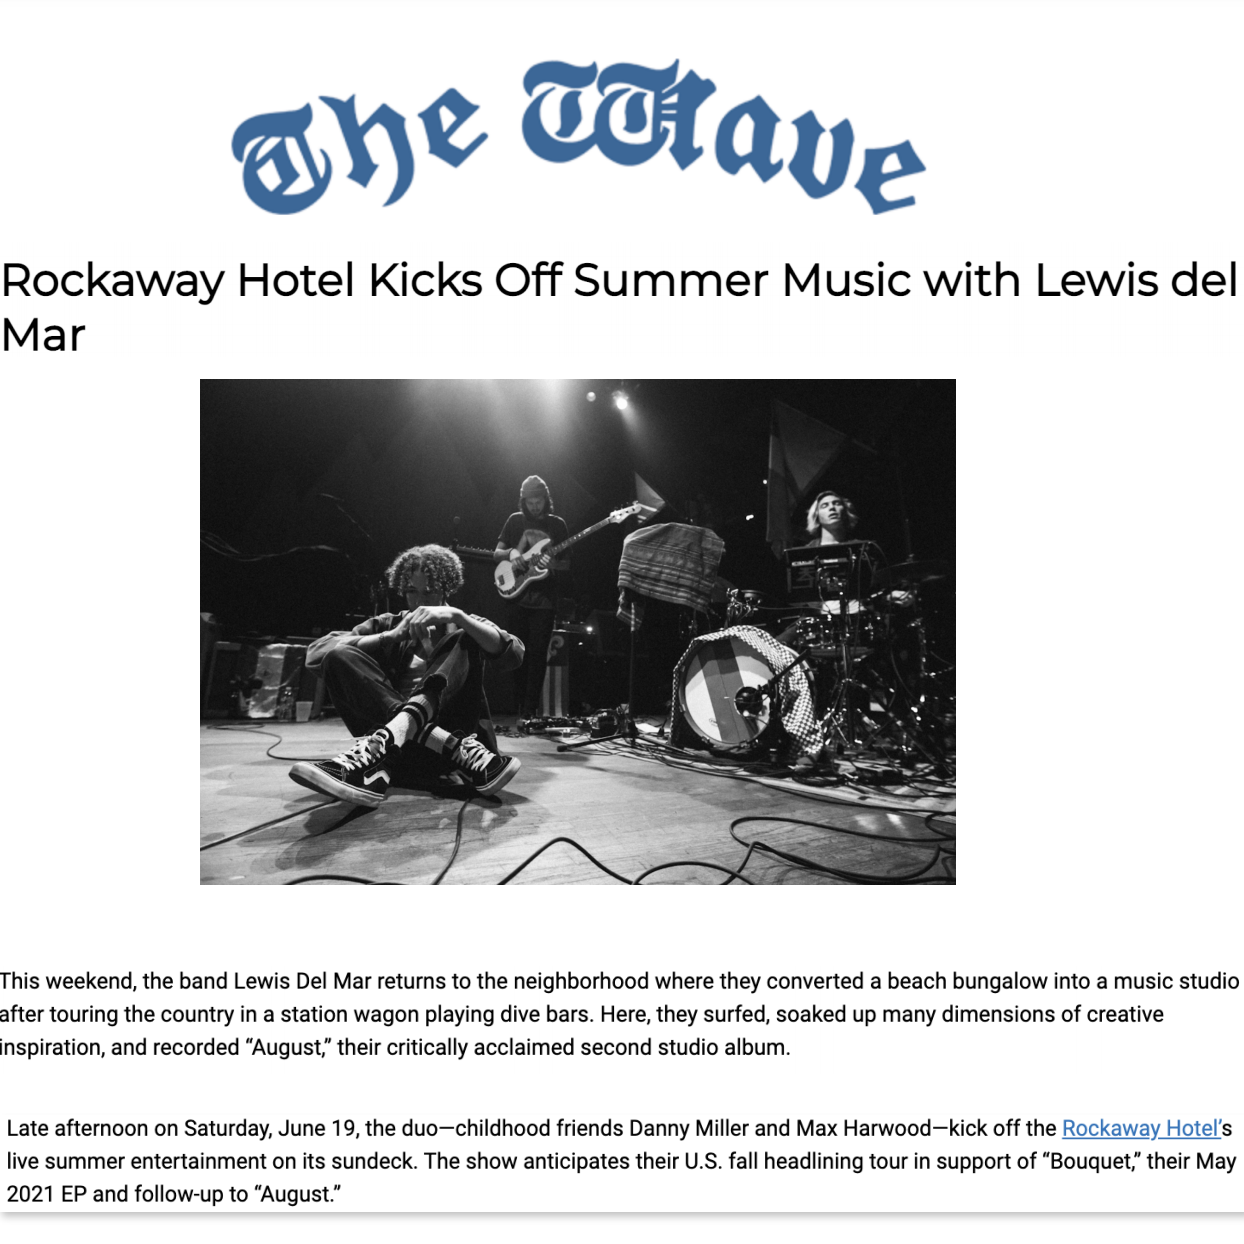 Article about The Rockaway Hotel in The Wave by Cara Cannella